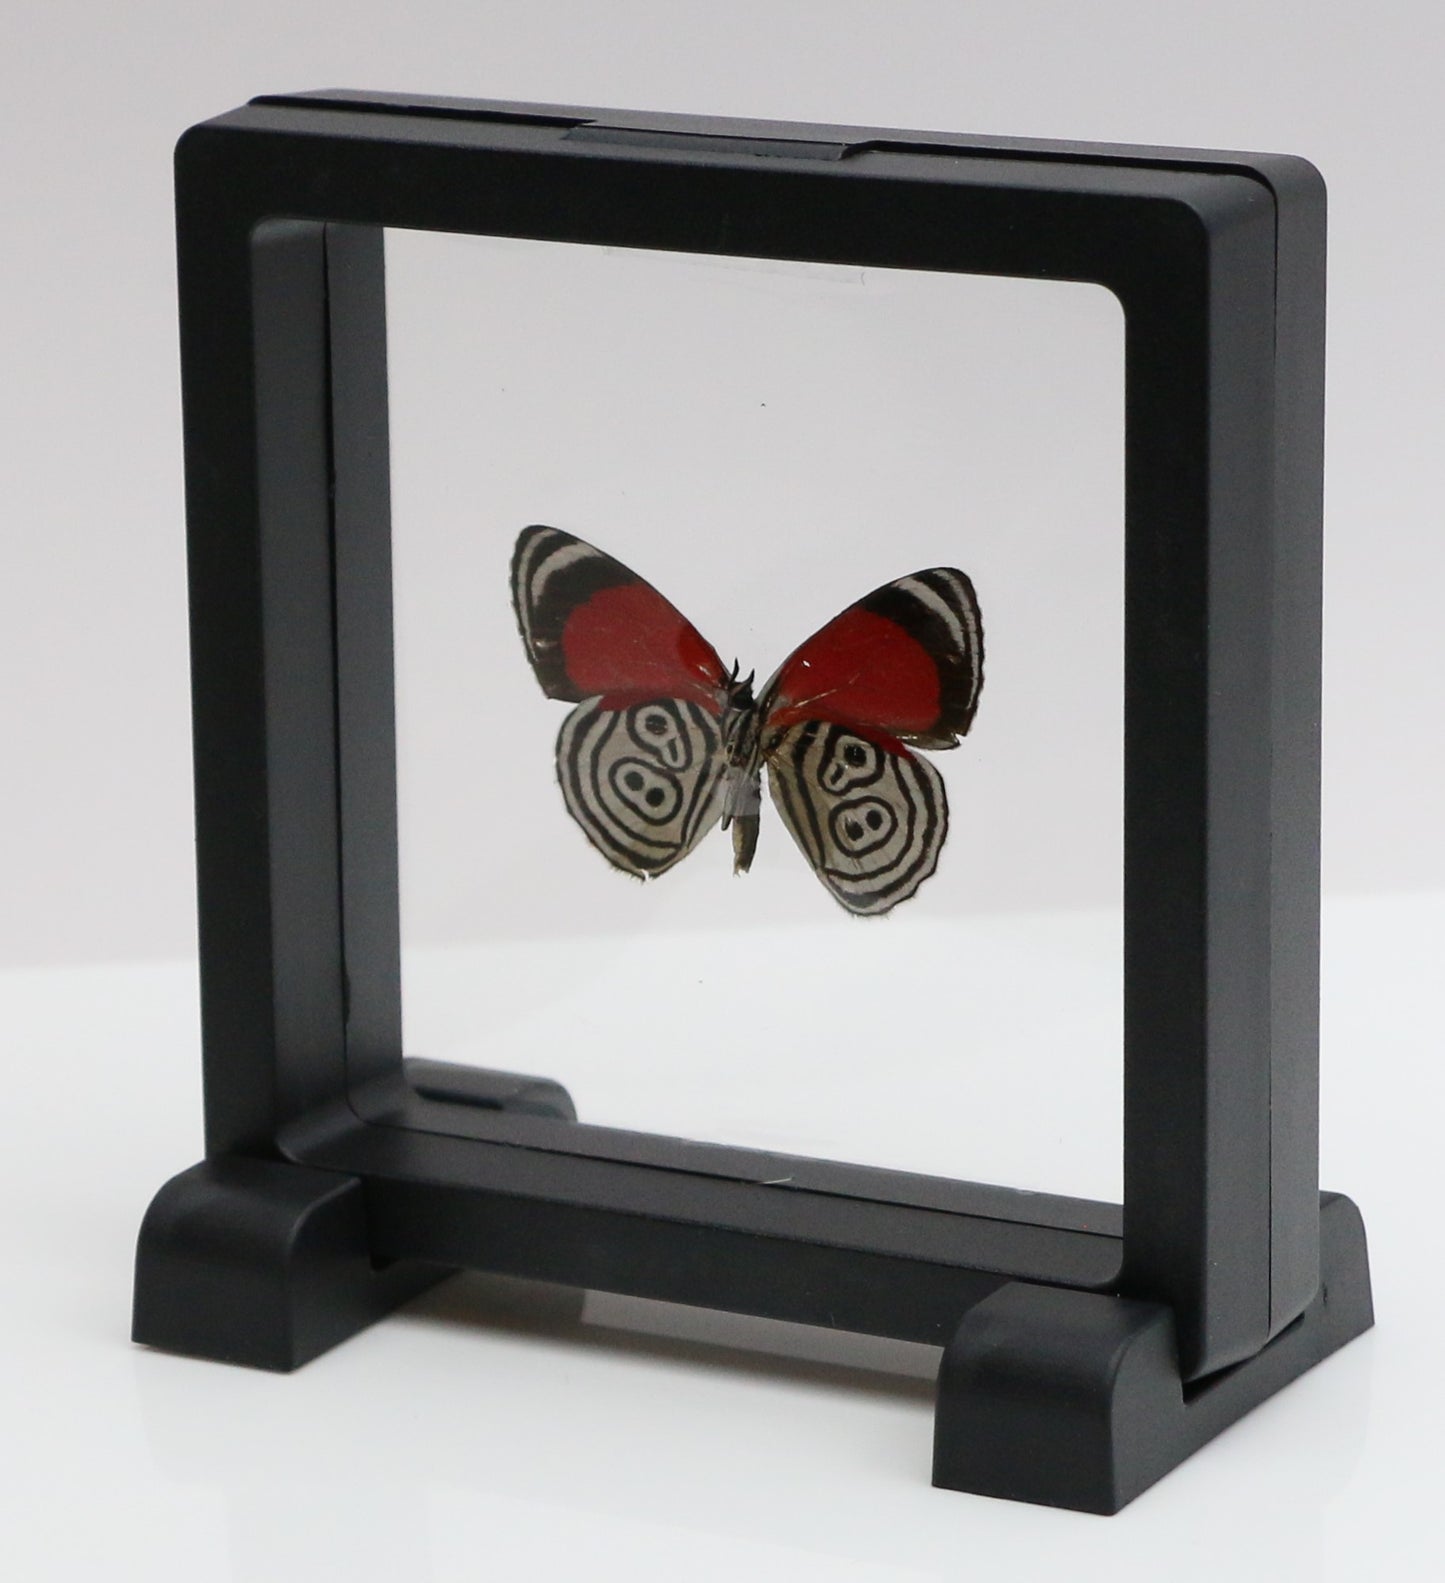 780000 - Floating Frame Display - 90x90mm - Black - BD Butterfly